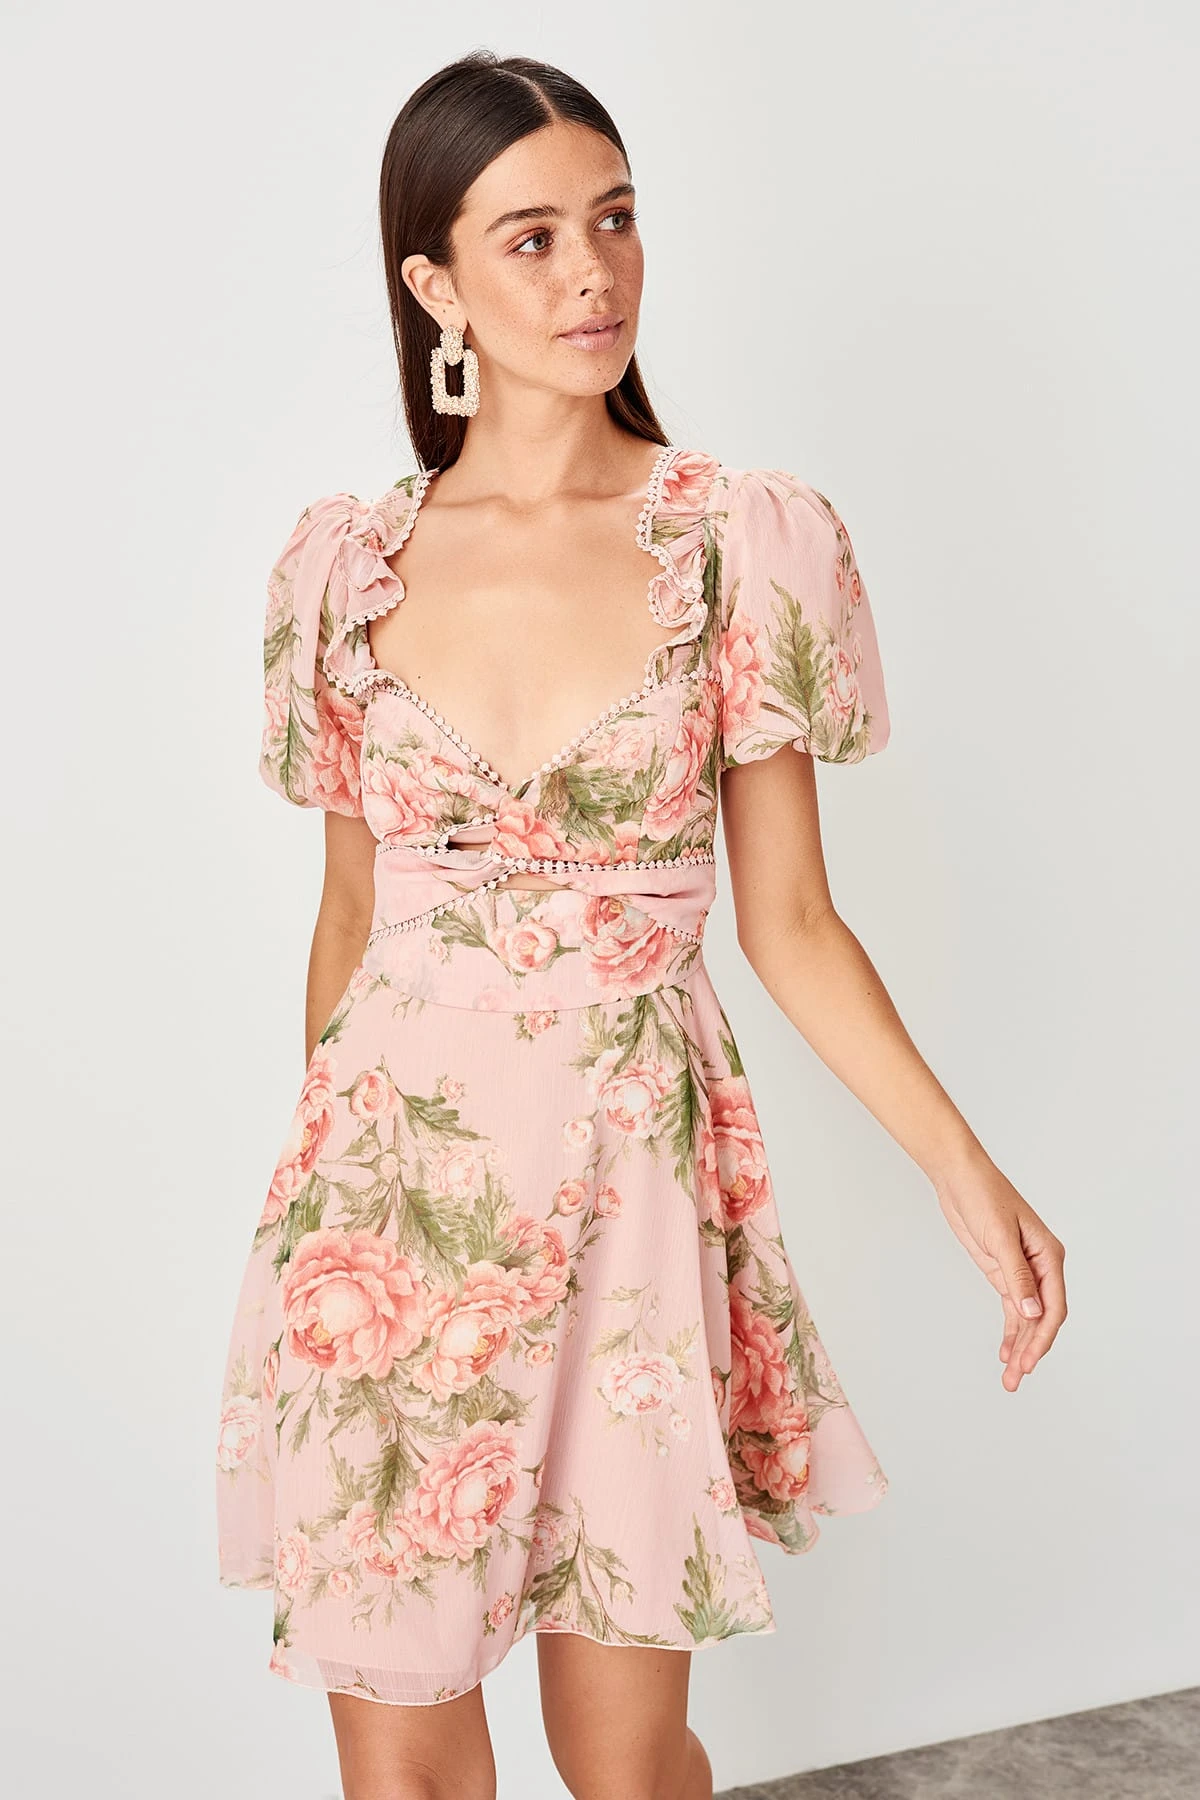 Frilly dresses for adults